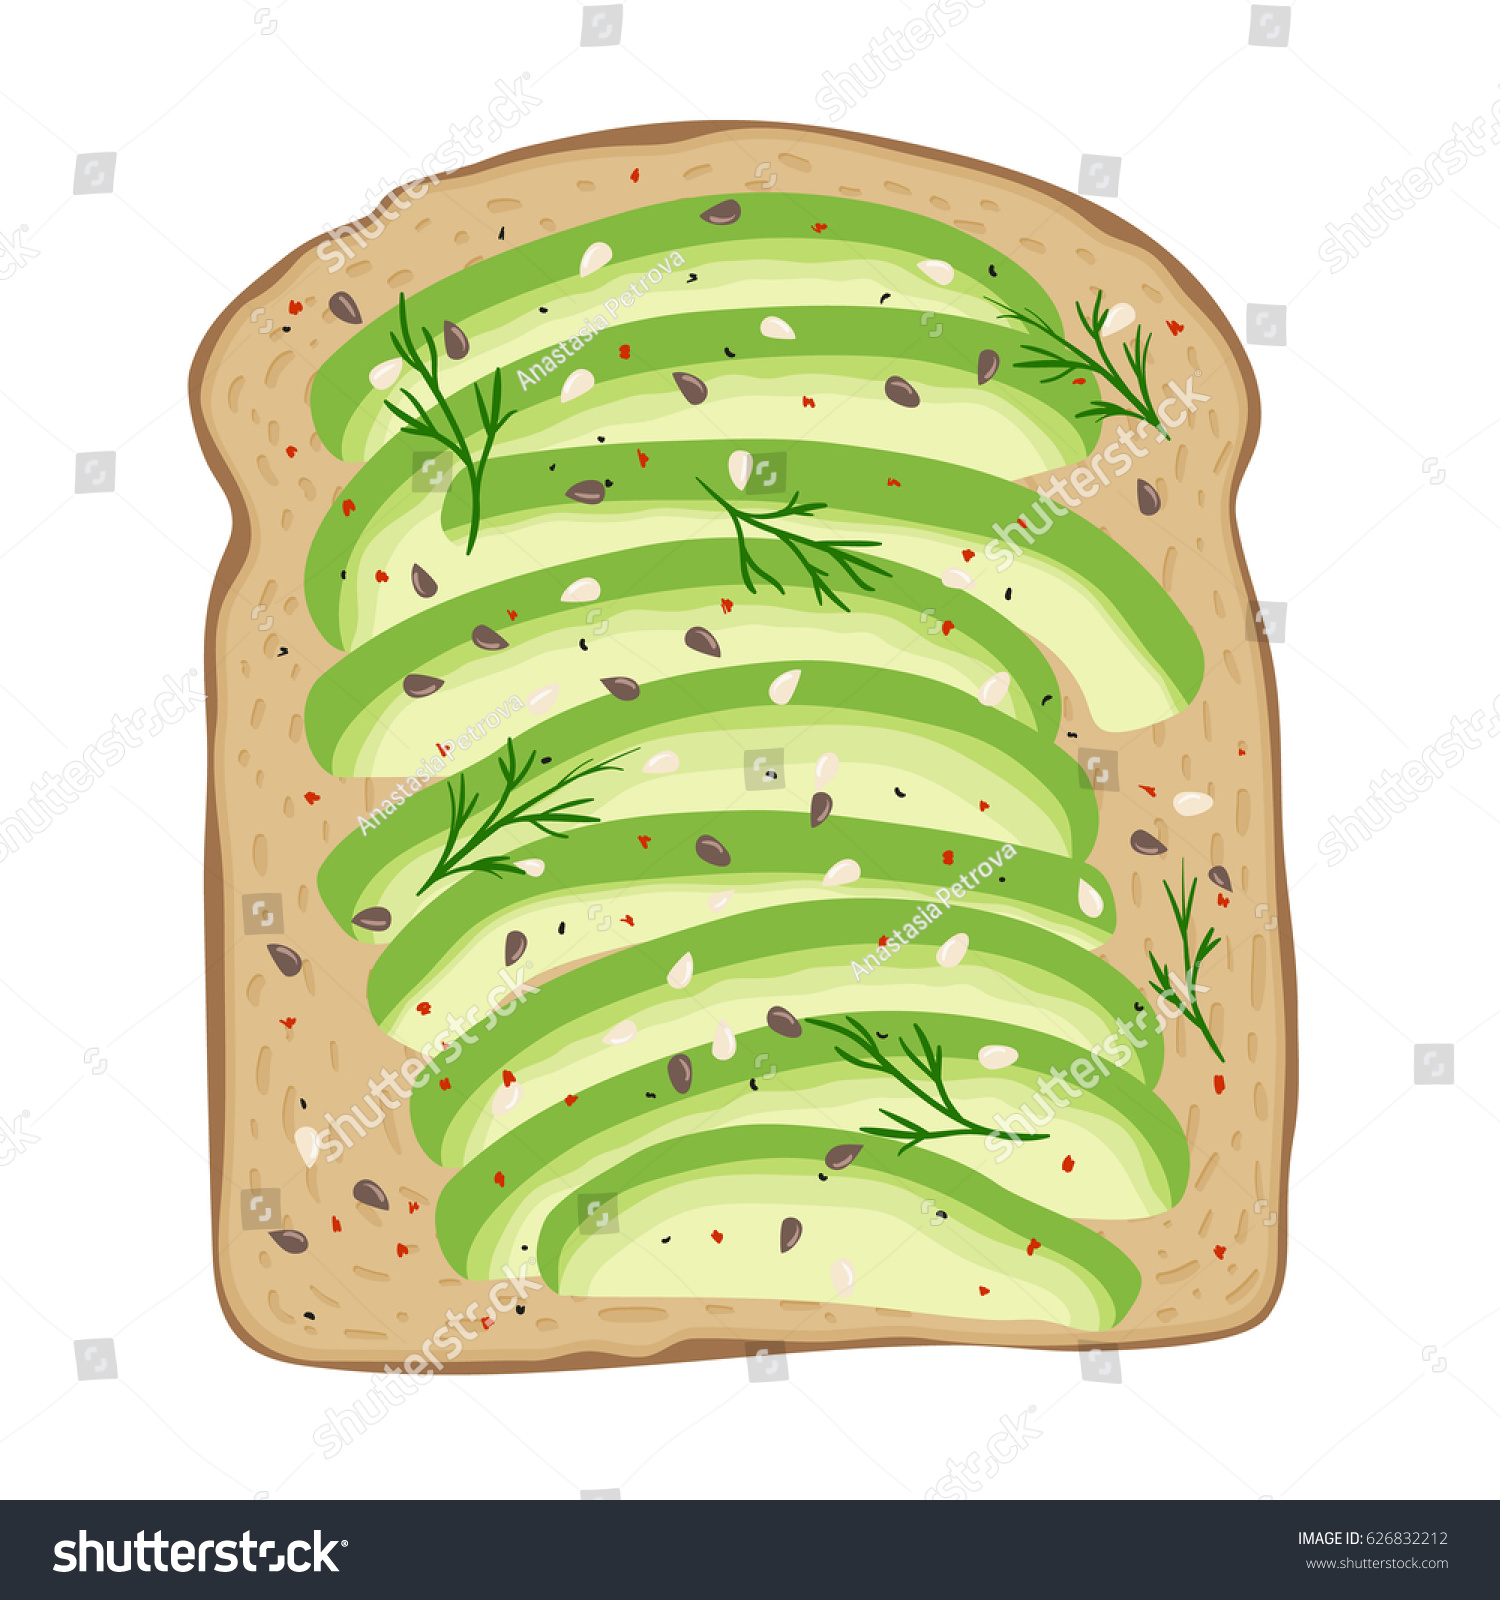 SVG of Avocado toast. Fresh toasted bread with slices of ripe avocado. Delicious avocado sandwich with sesame seeds, seasoning and dill. Vector illustration. svg